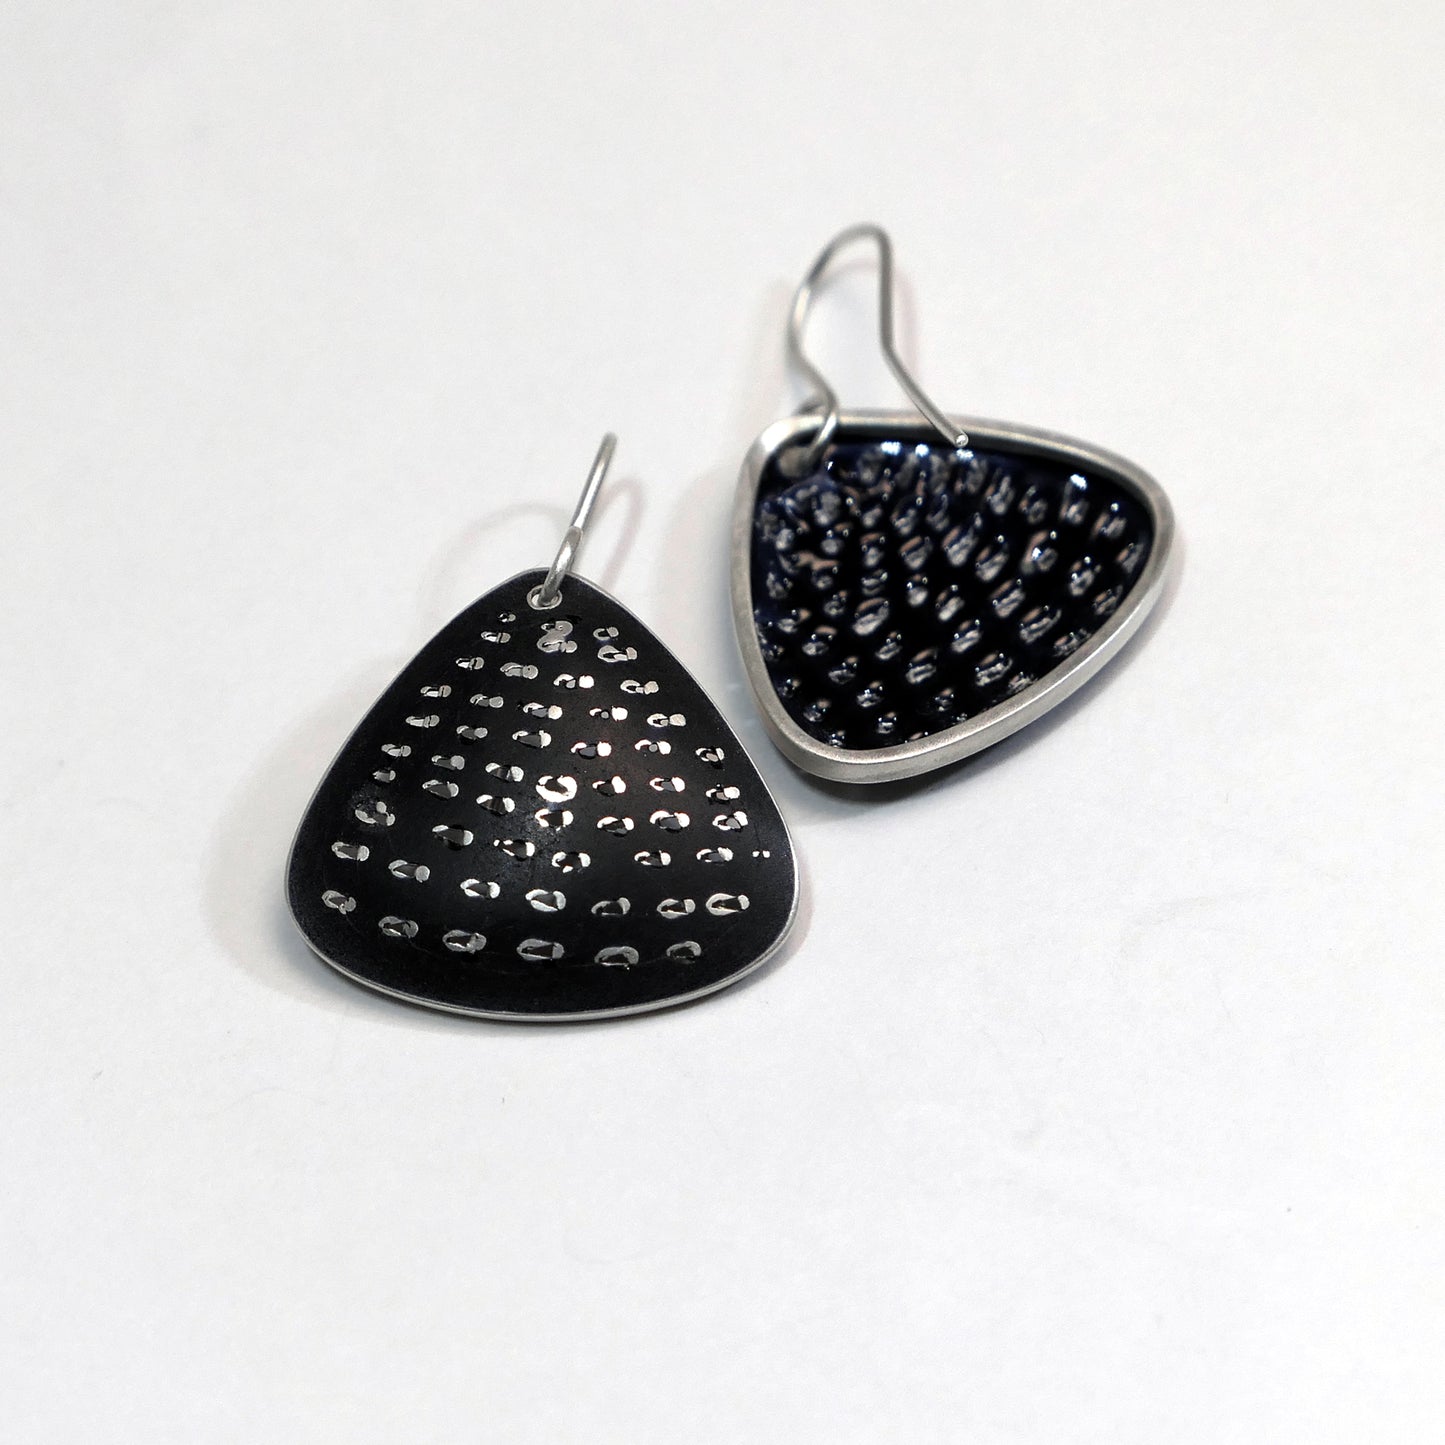 Black and silver Triangle earrings